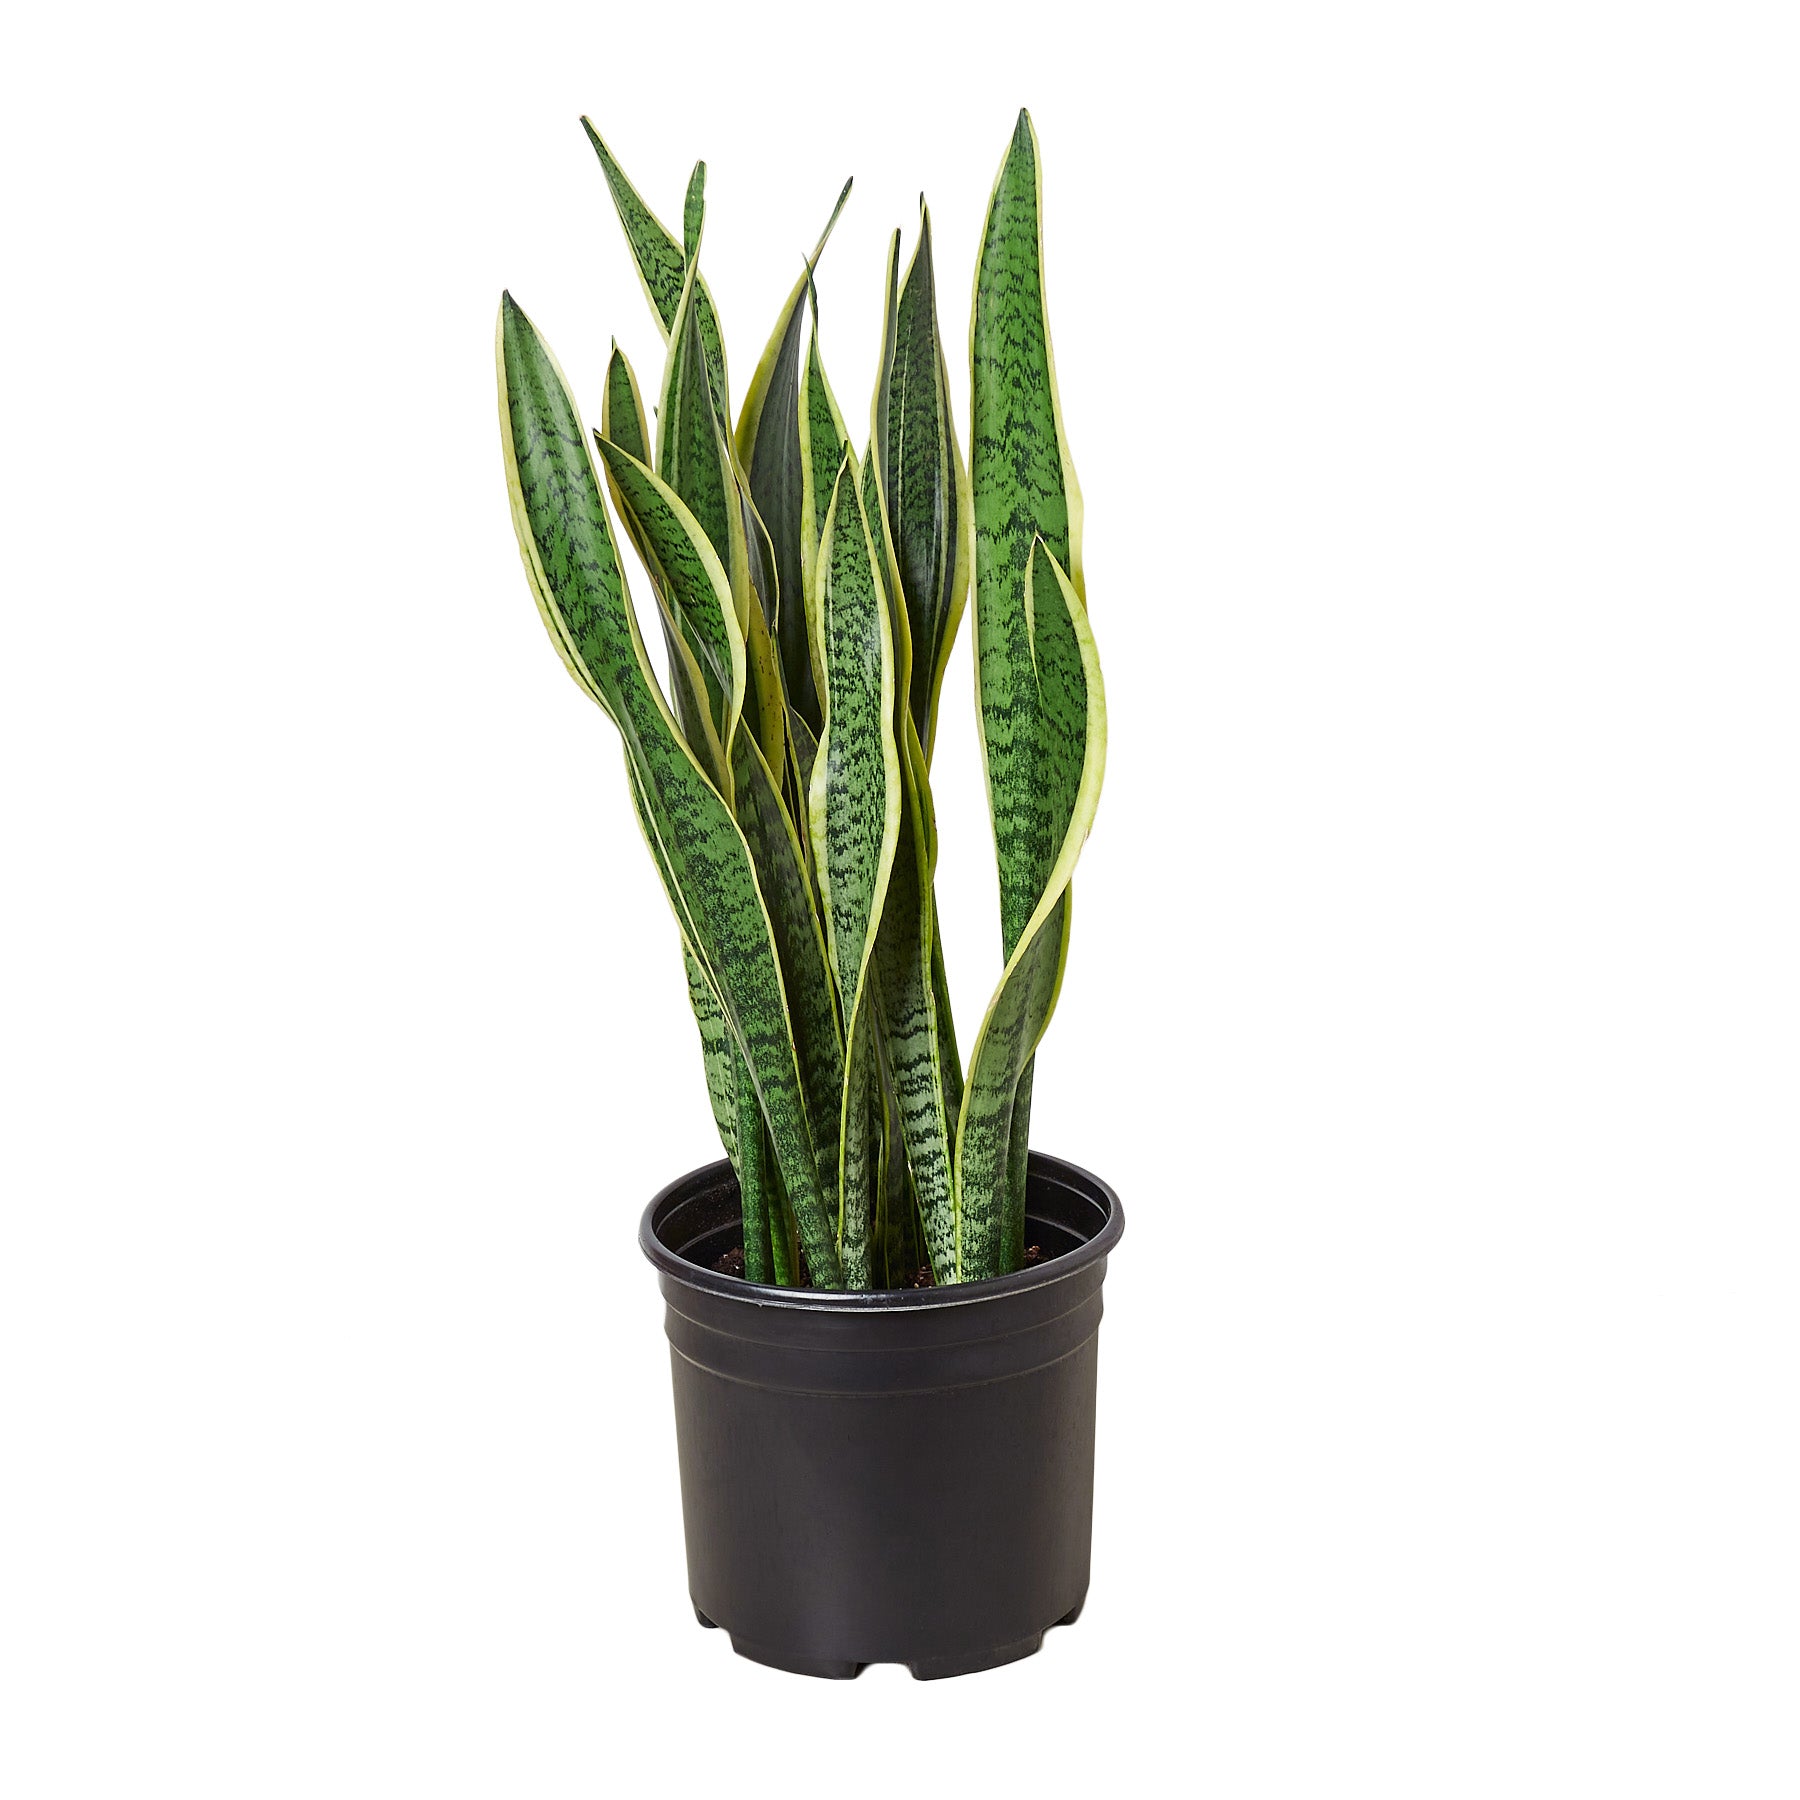 A snake plant in a black pot on a white background, available at the best plant nursery near me.